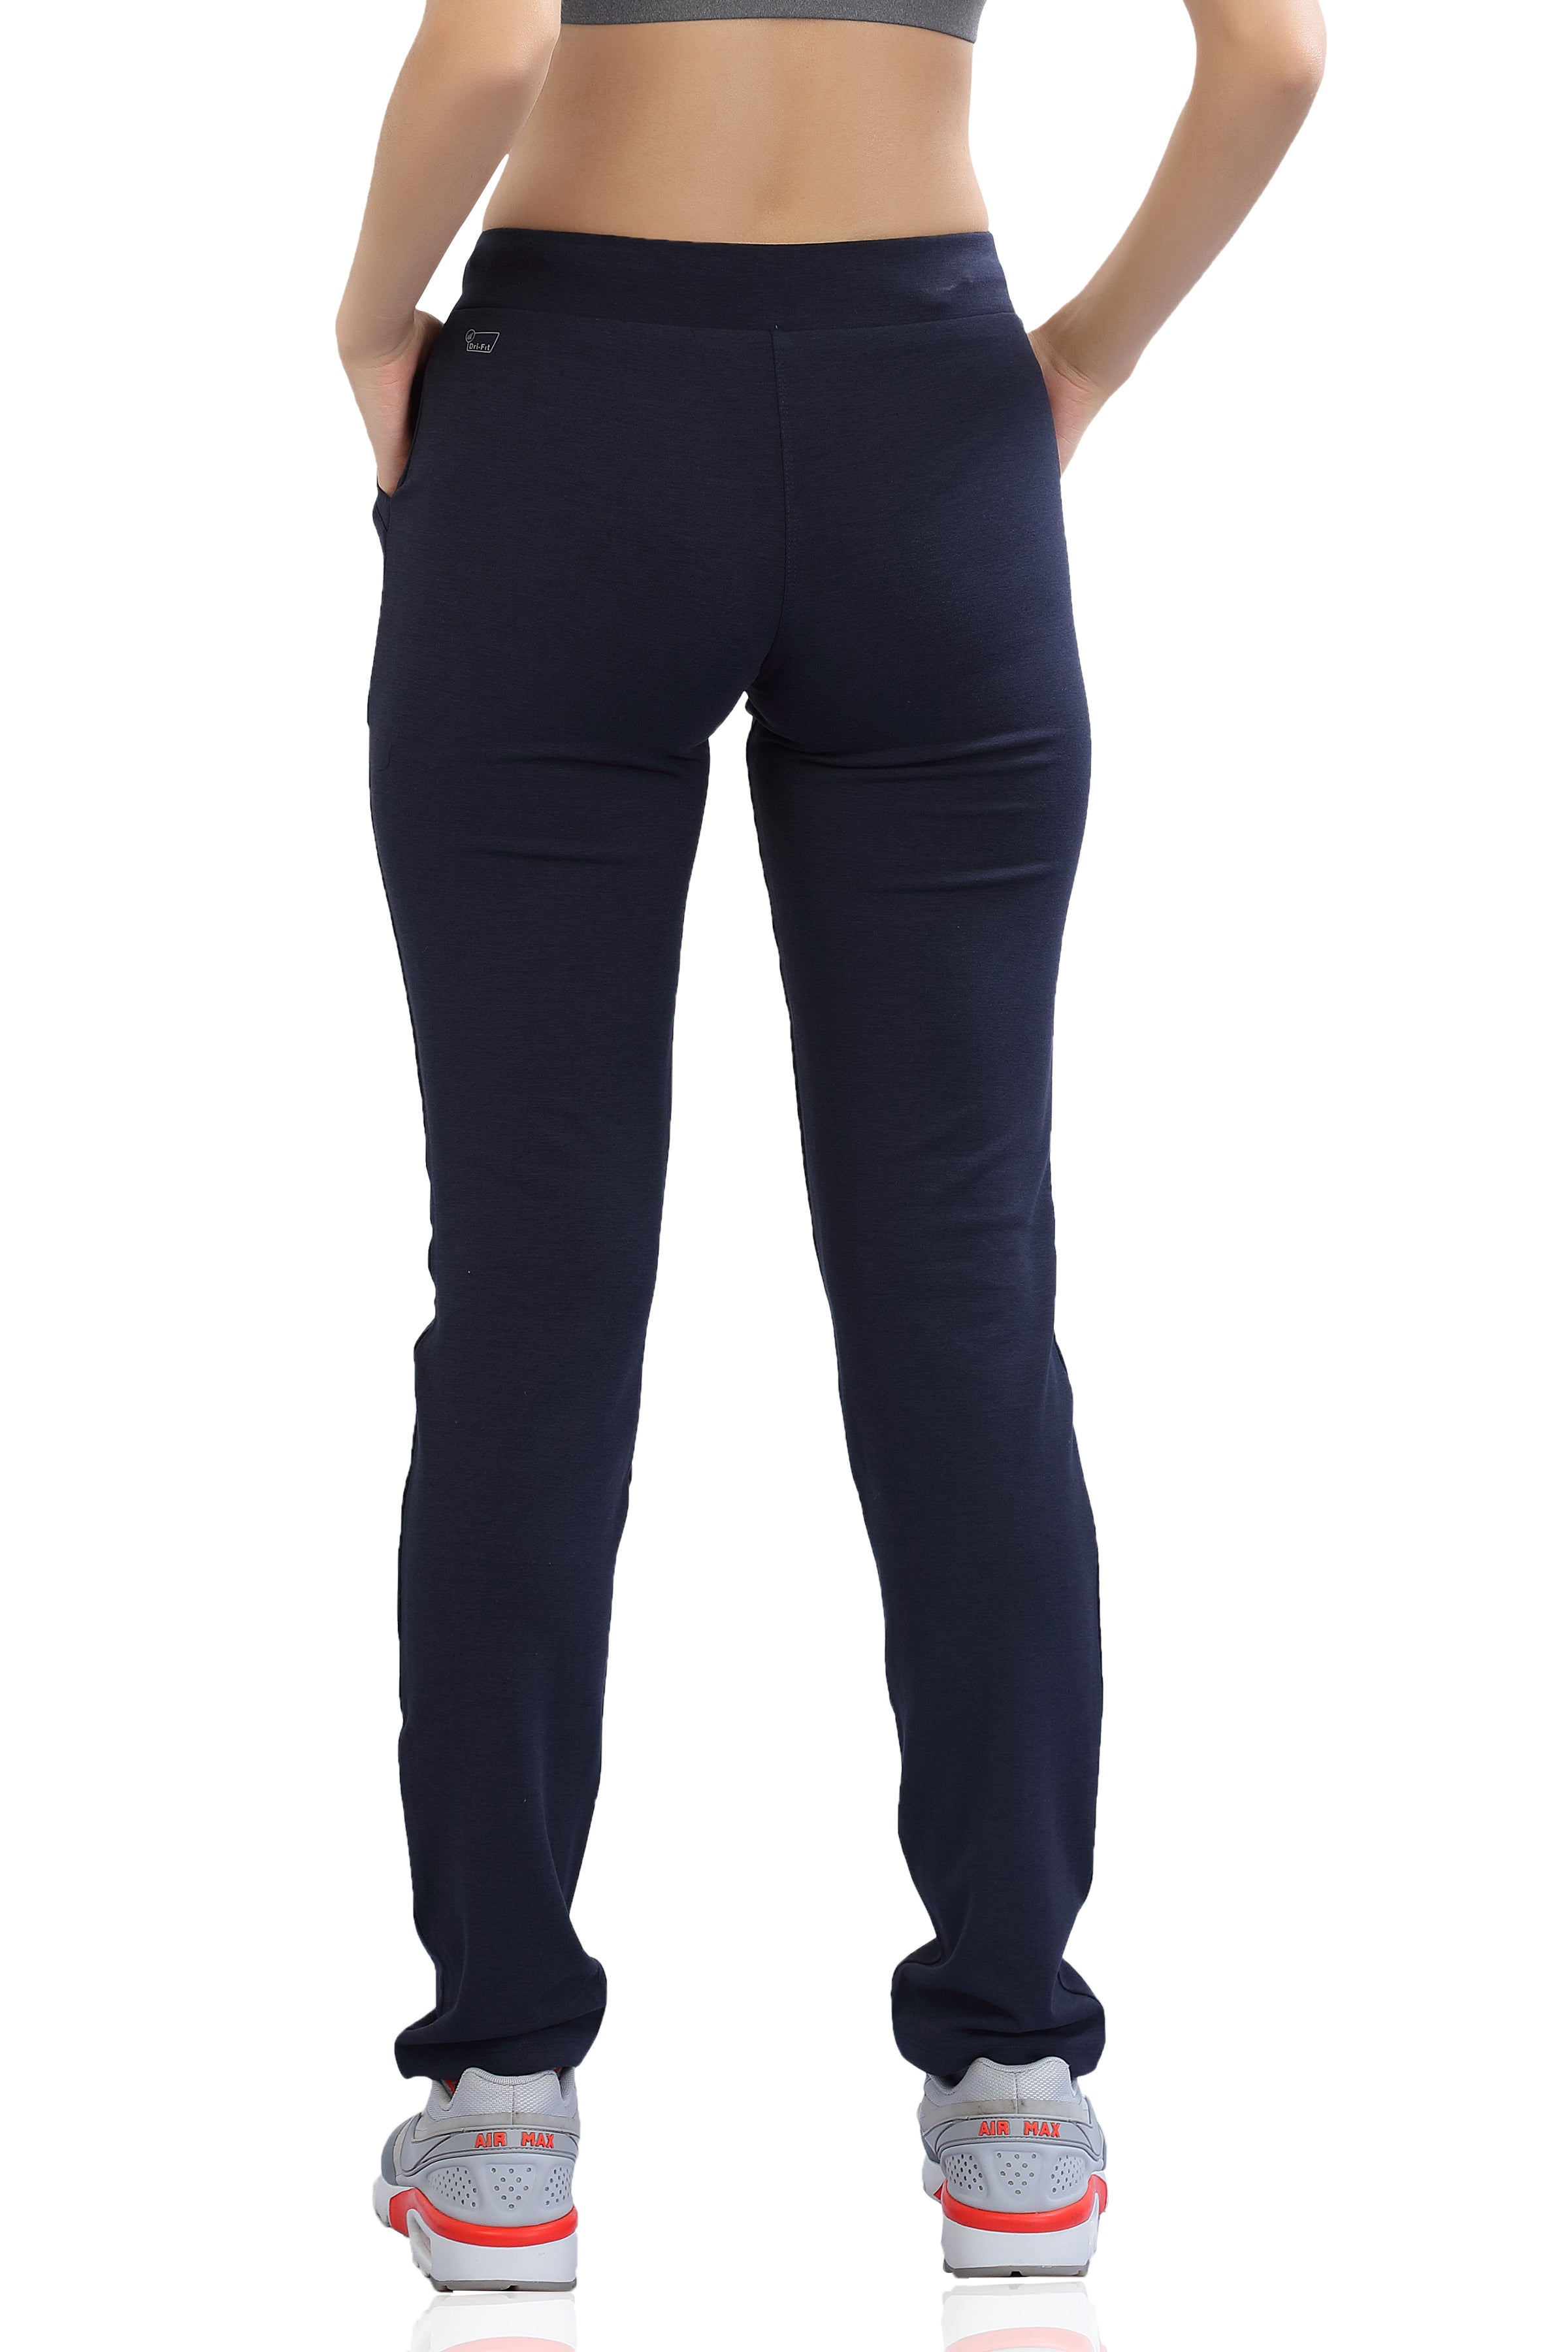 Nike Women's Dri-FIT One Ultra High-Waisted Pants | Dick's Sporting Goods